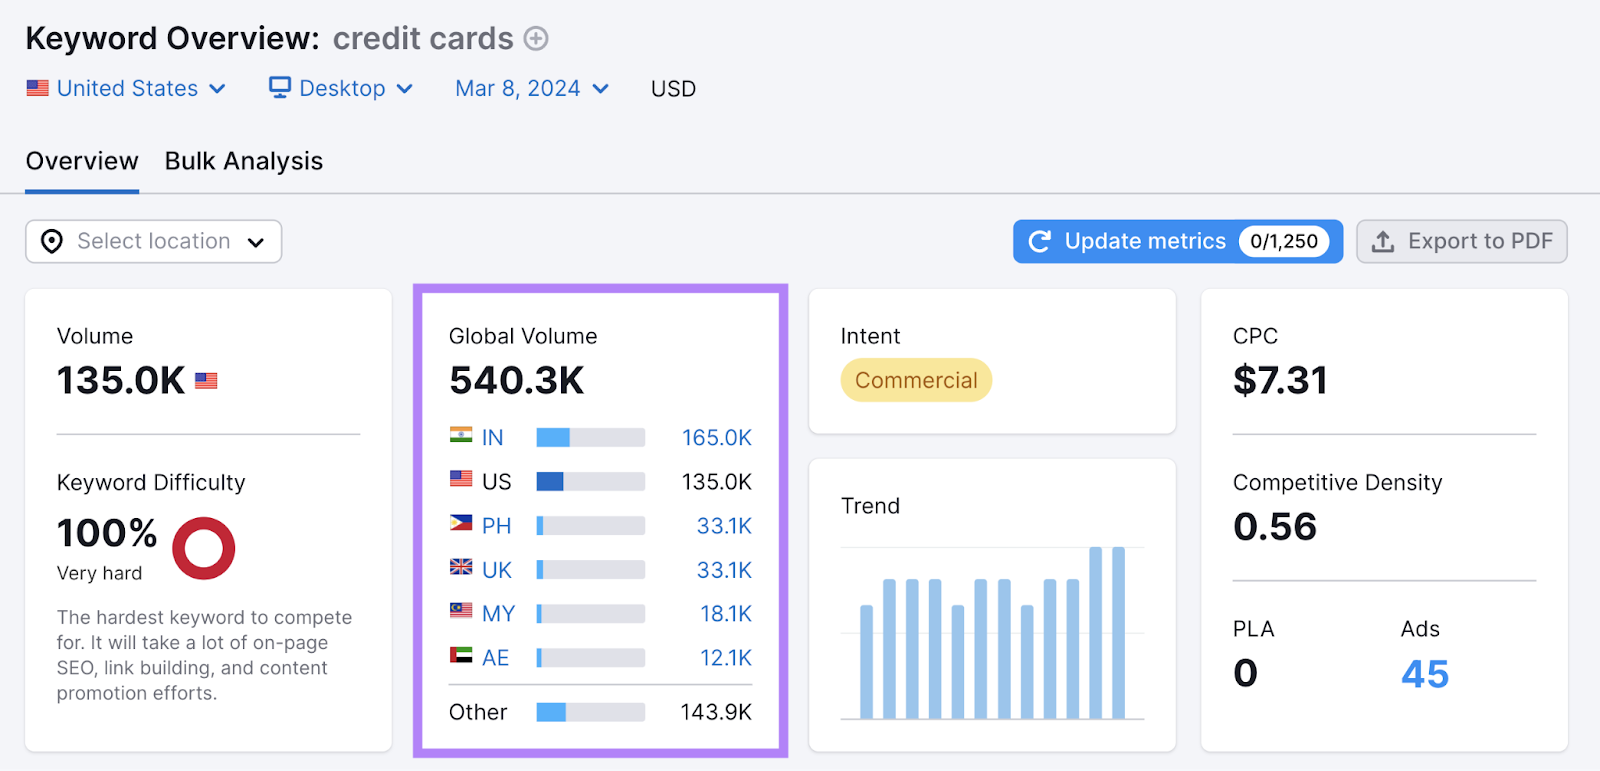 Global measurement   metric for "credit cards" shown successful  Keyword Overview